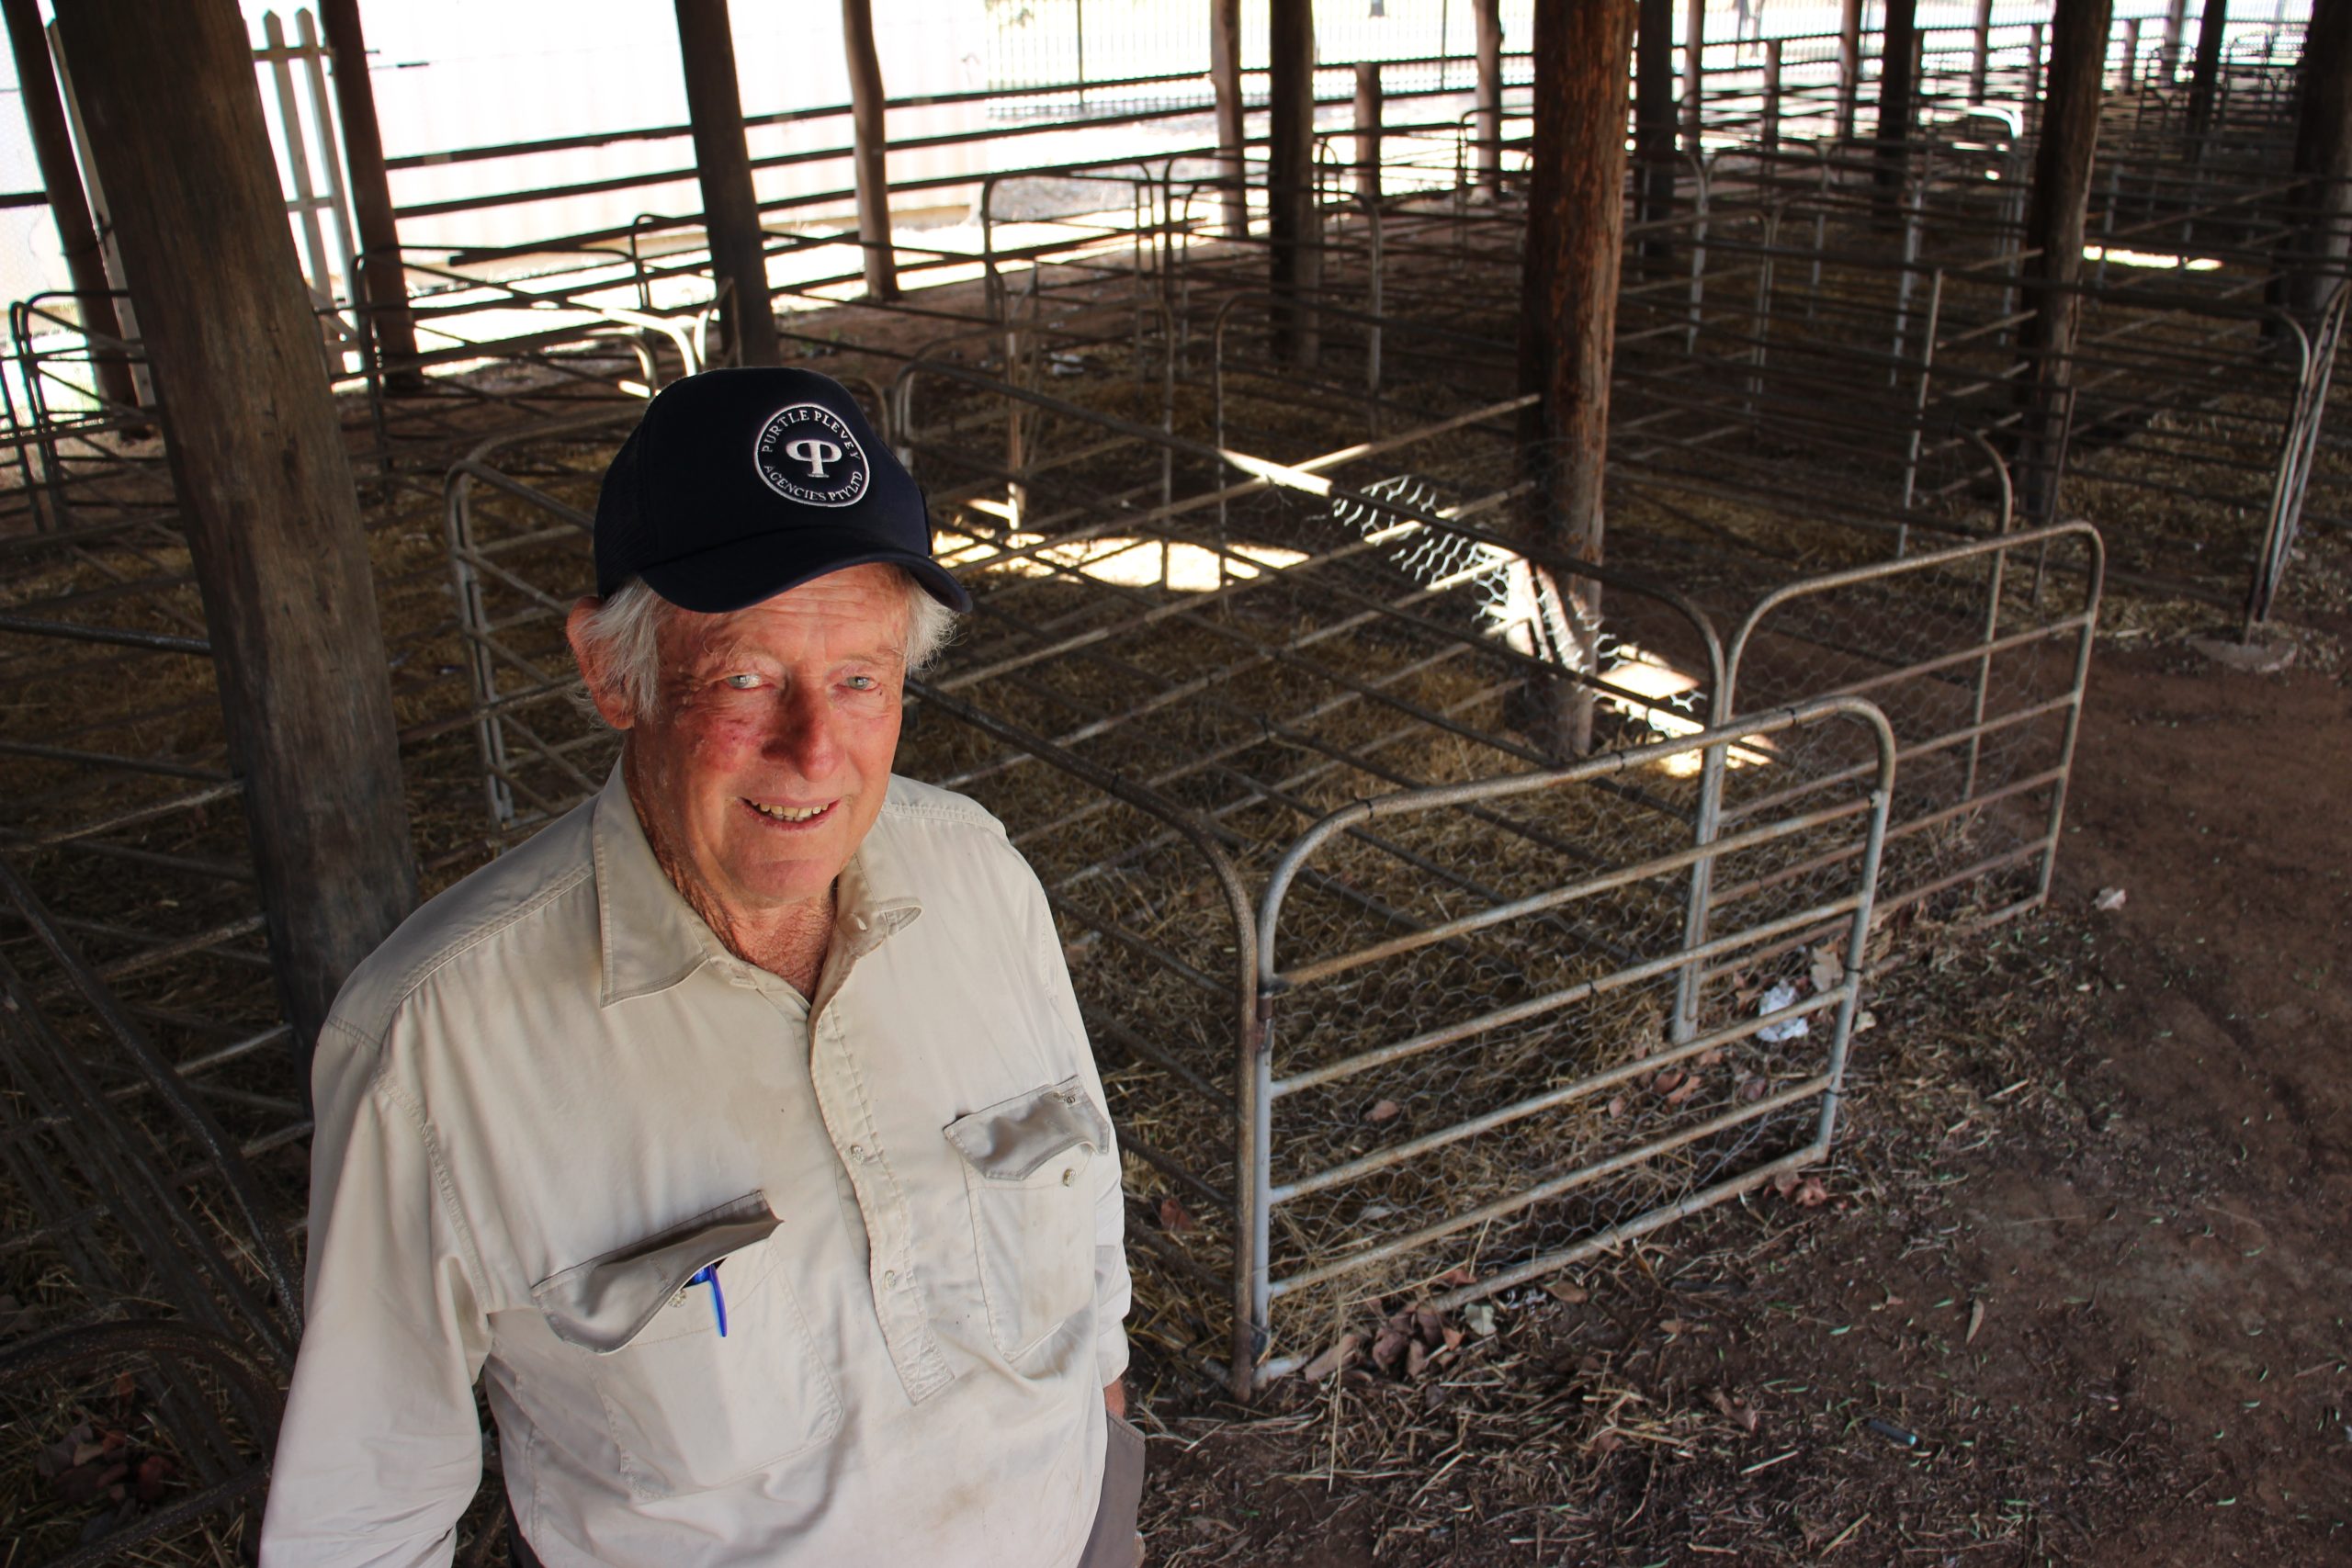 ‘Sheep shed can be saved’